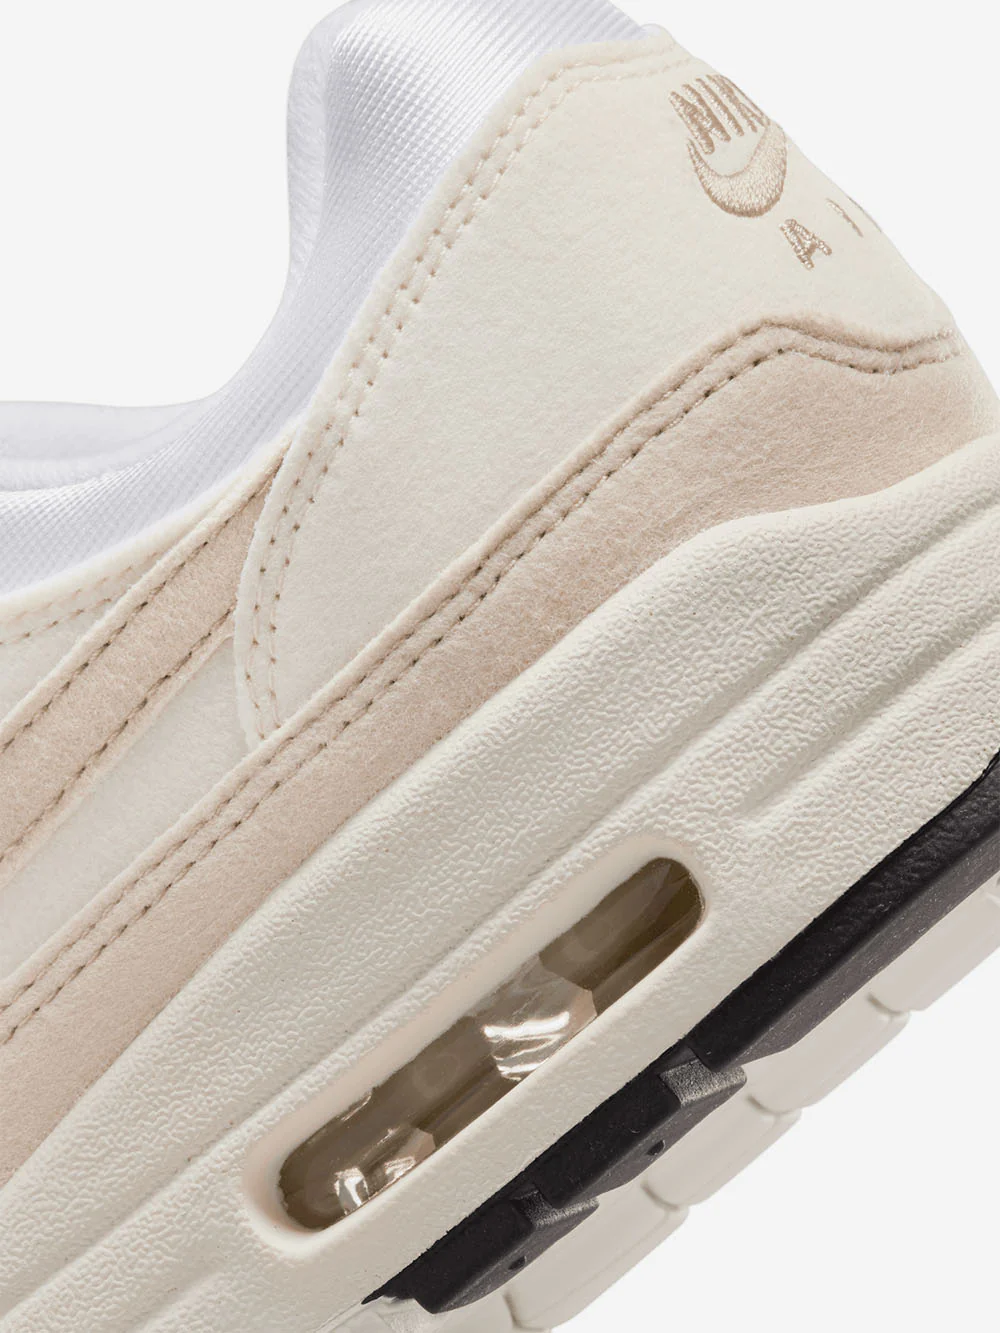 Nike Air Max 1 87 WMNS 'Pale Ivory' details